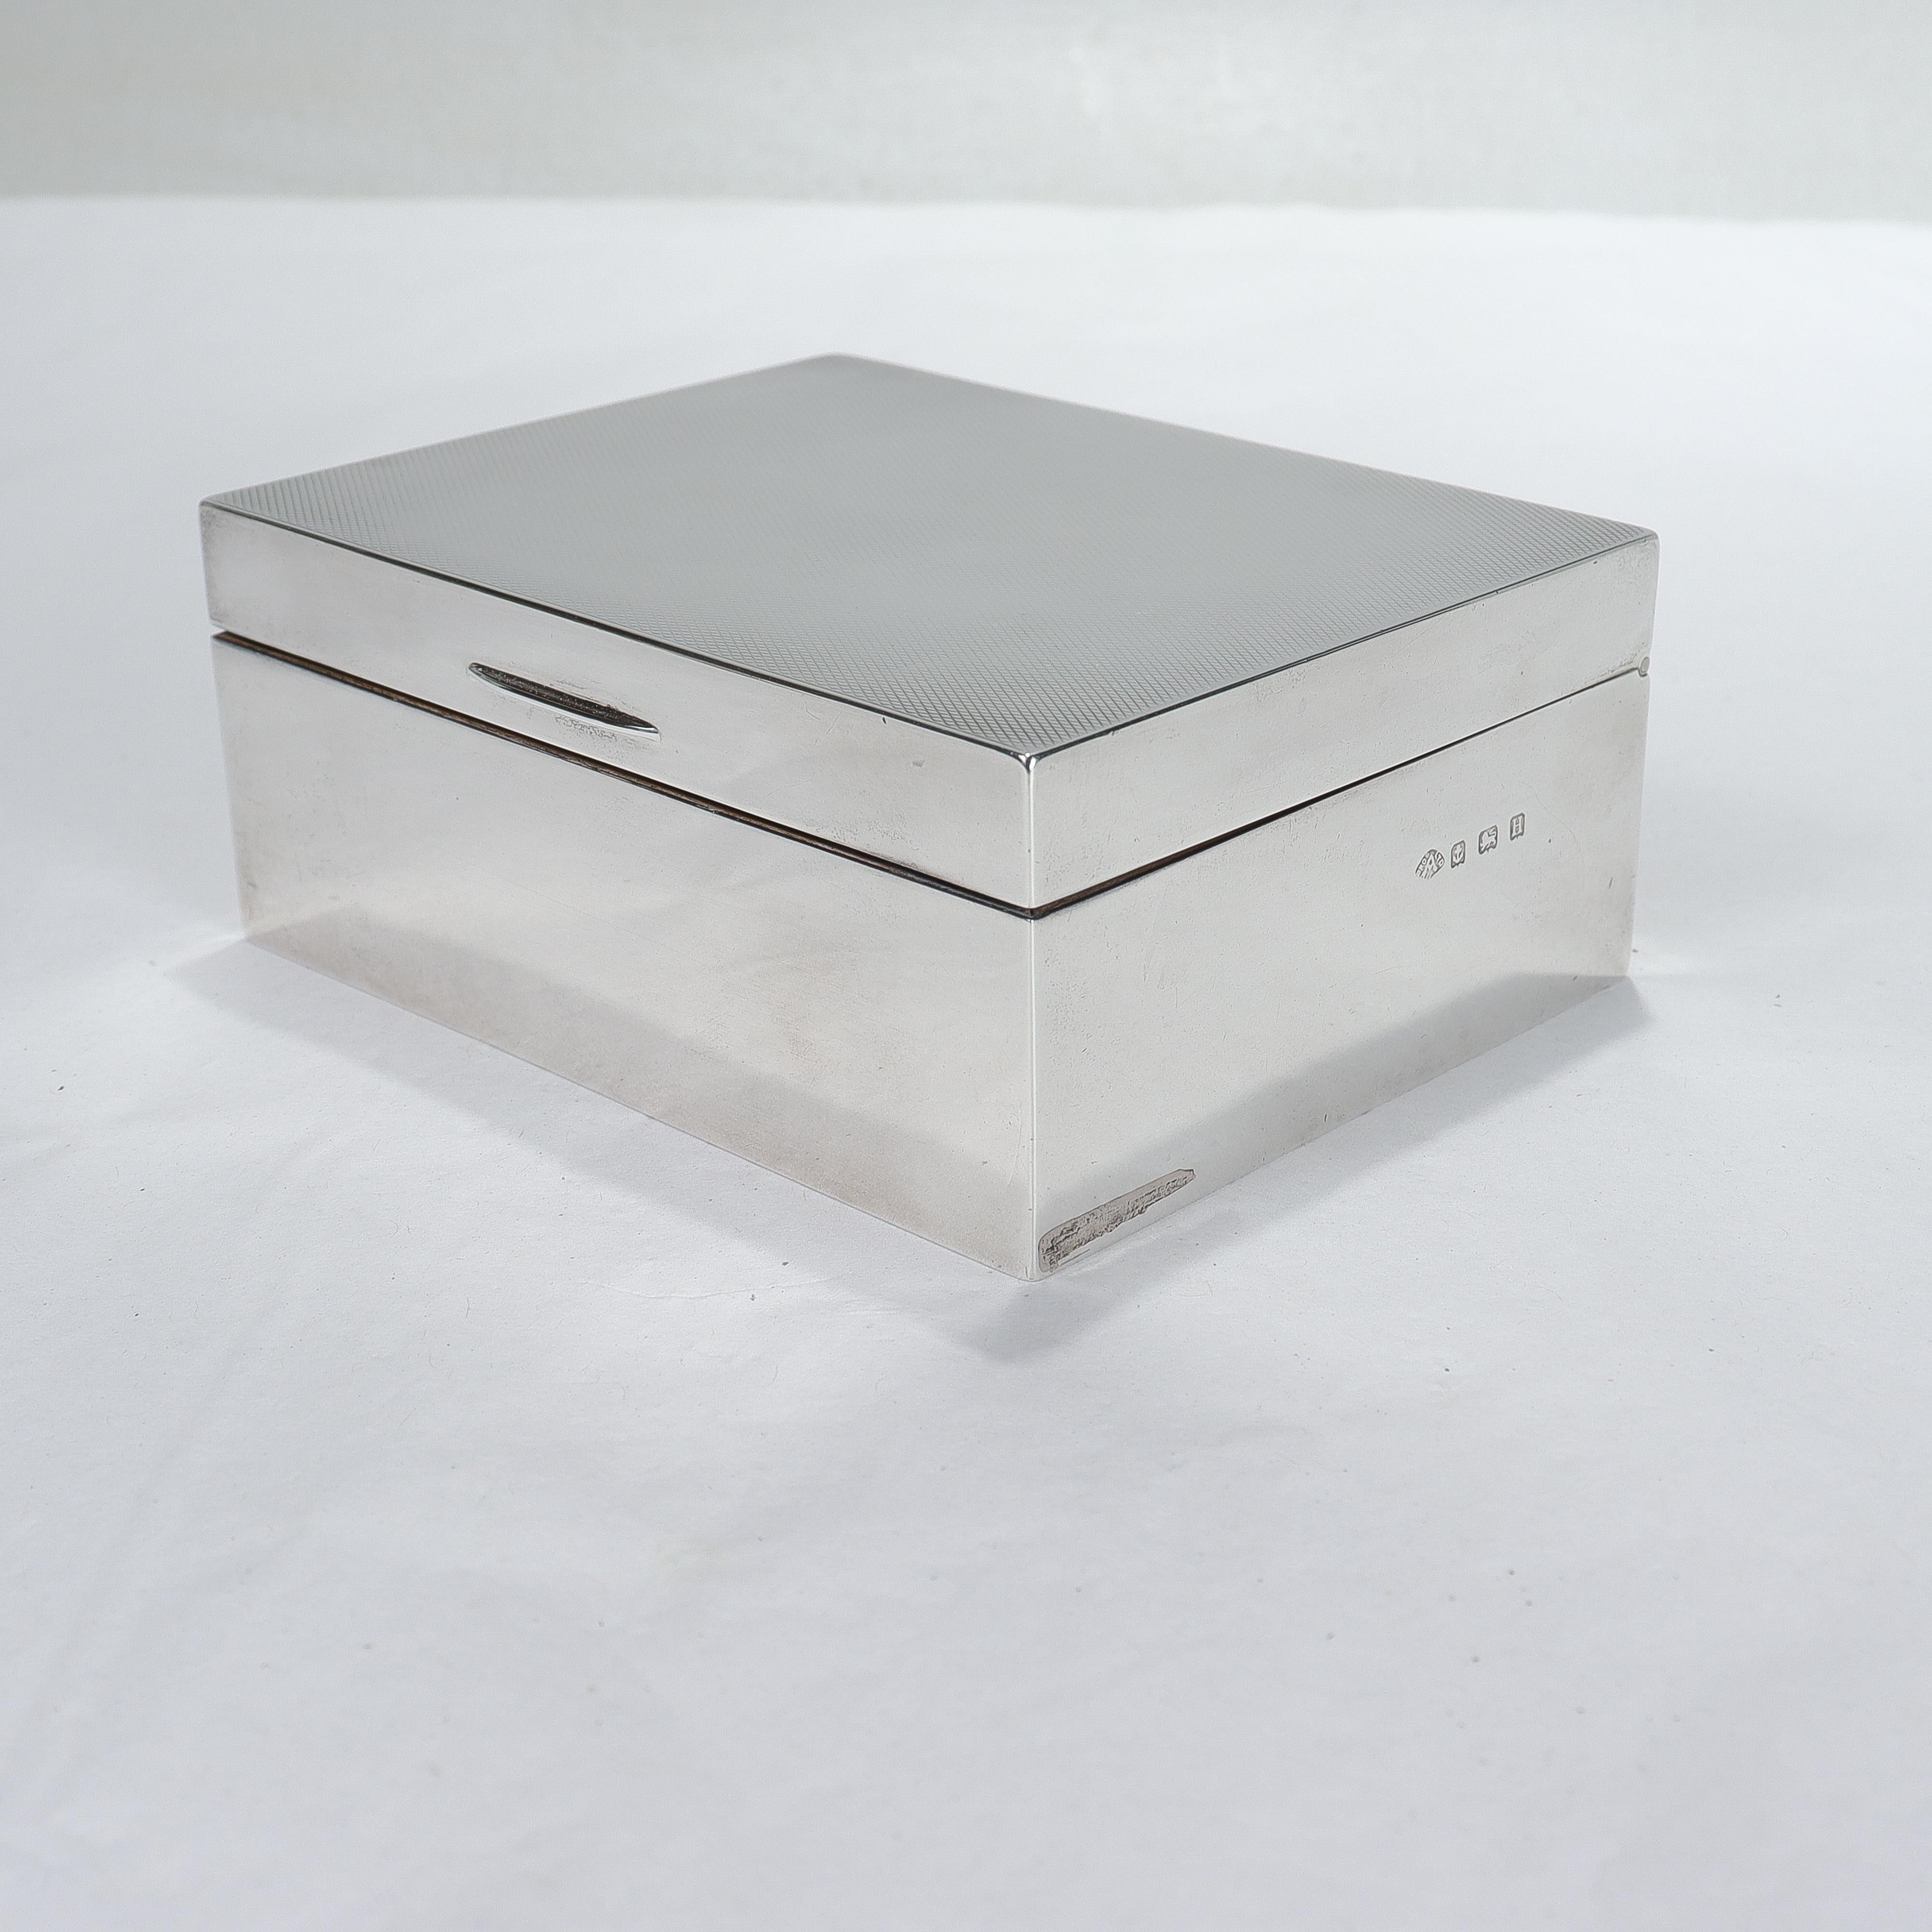 A fine English Art Deco sterling silver presentation dresser or vanity box.

By Adie Brothers of Birmingham.

In sterling silver.

With a shark skin finish to the lid and a dedication to the interior that reads:

